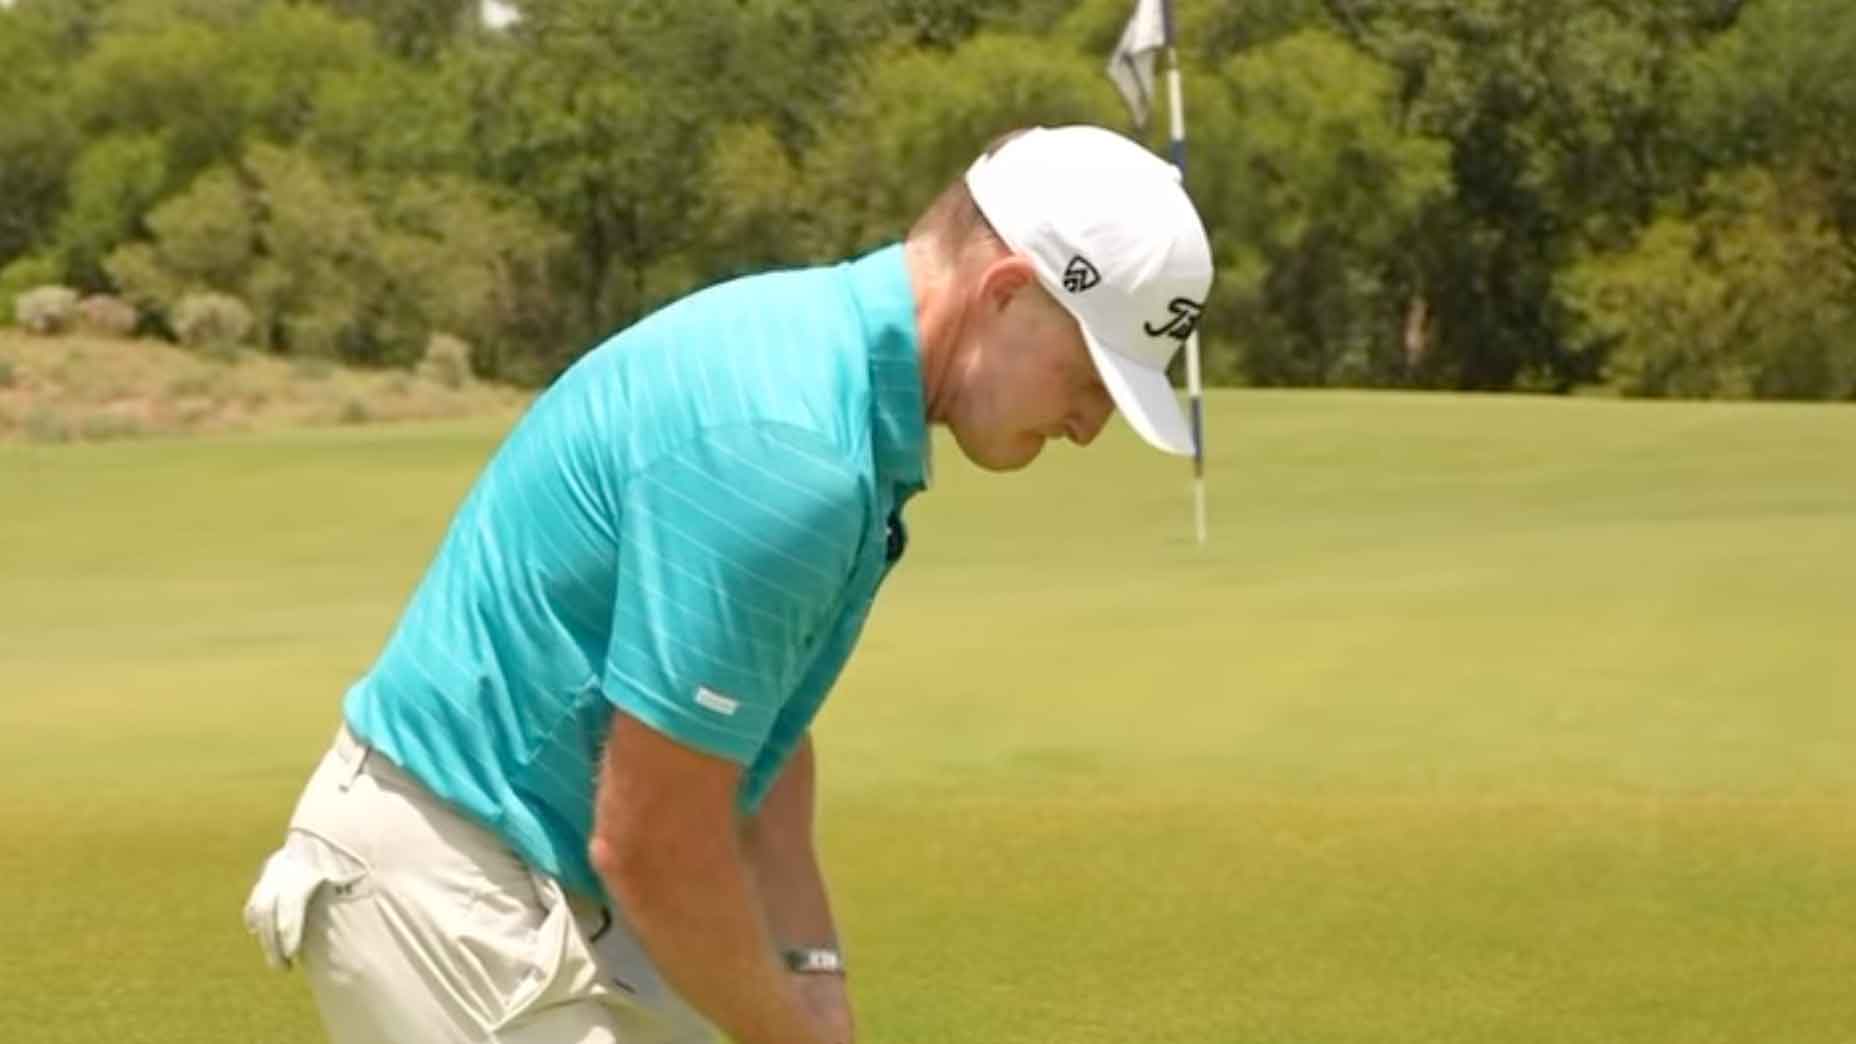 GOLF Top 100 Teacher Cameron McCormick shares a putting drill for players who use the Texas wedge rather than chipping from off the green